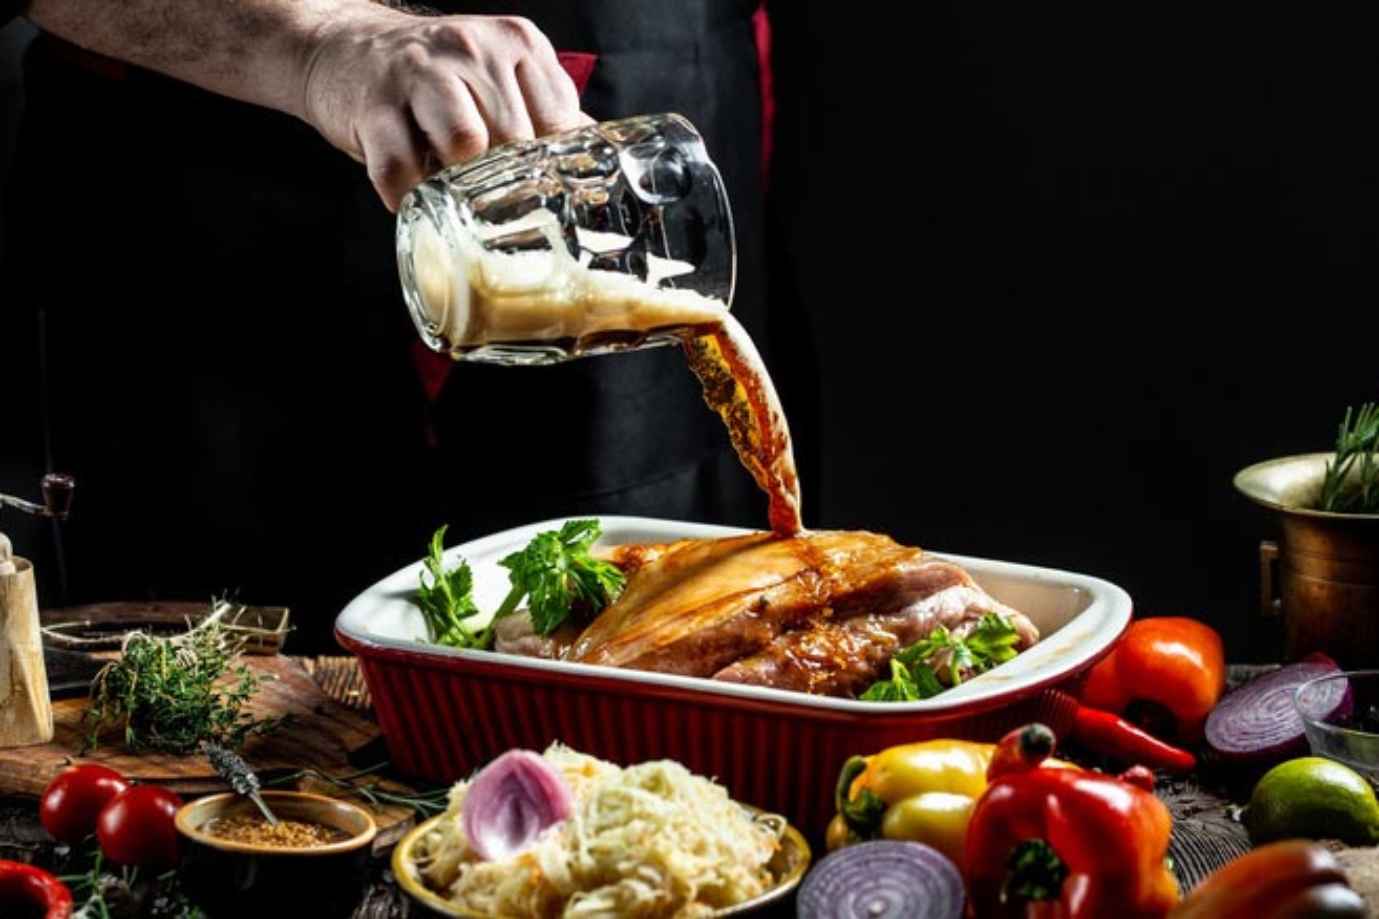 Add Beer to Your Next Homecooked Meal